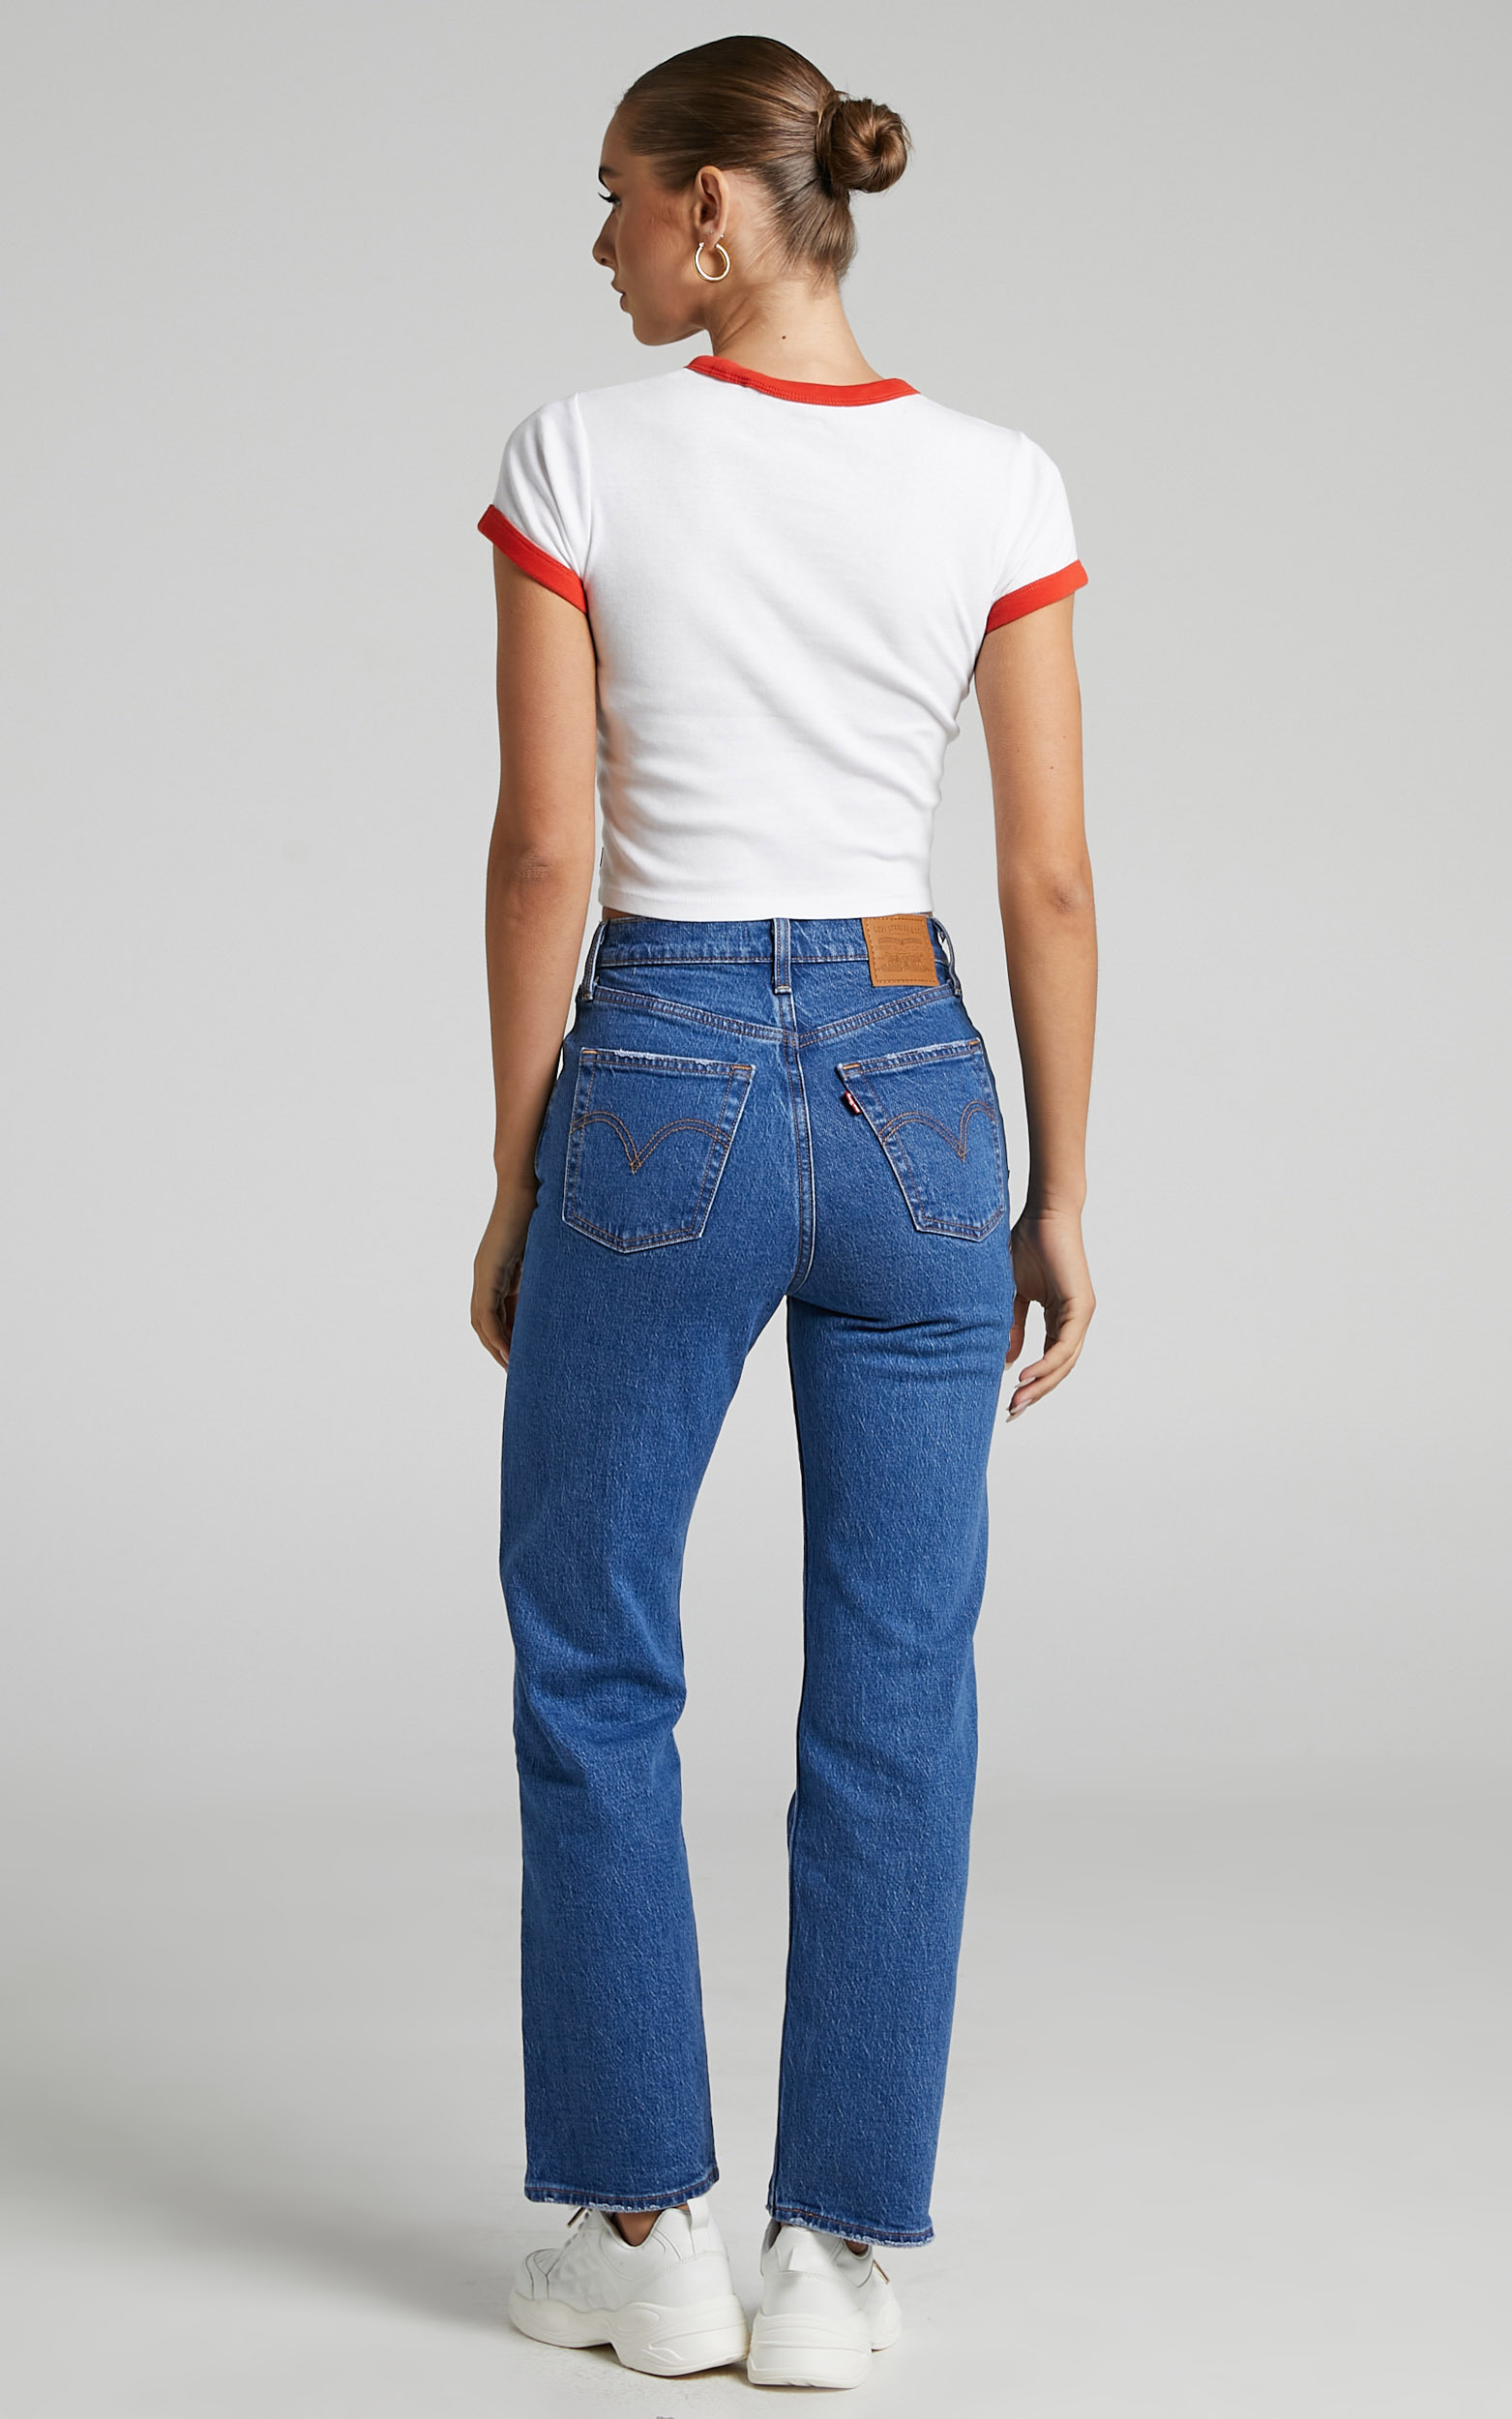 Levi's - Ribcage Straight Ankle Jean in JAZZ JIVE TOGETHER